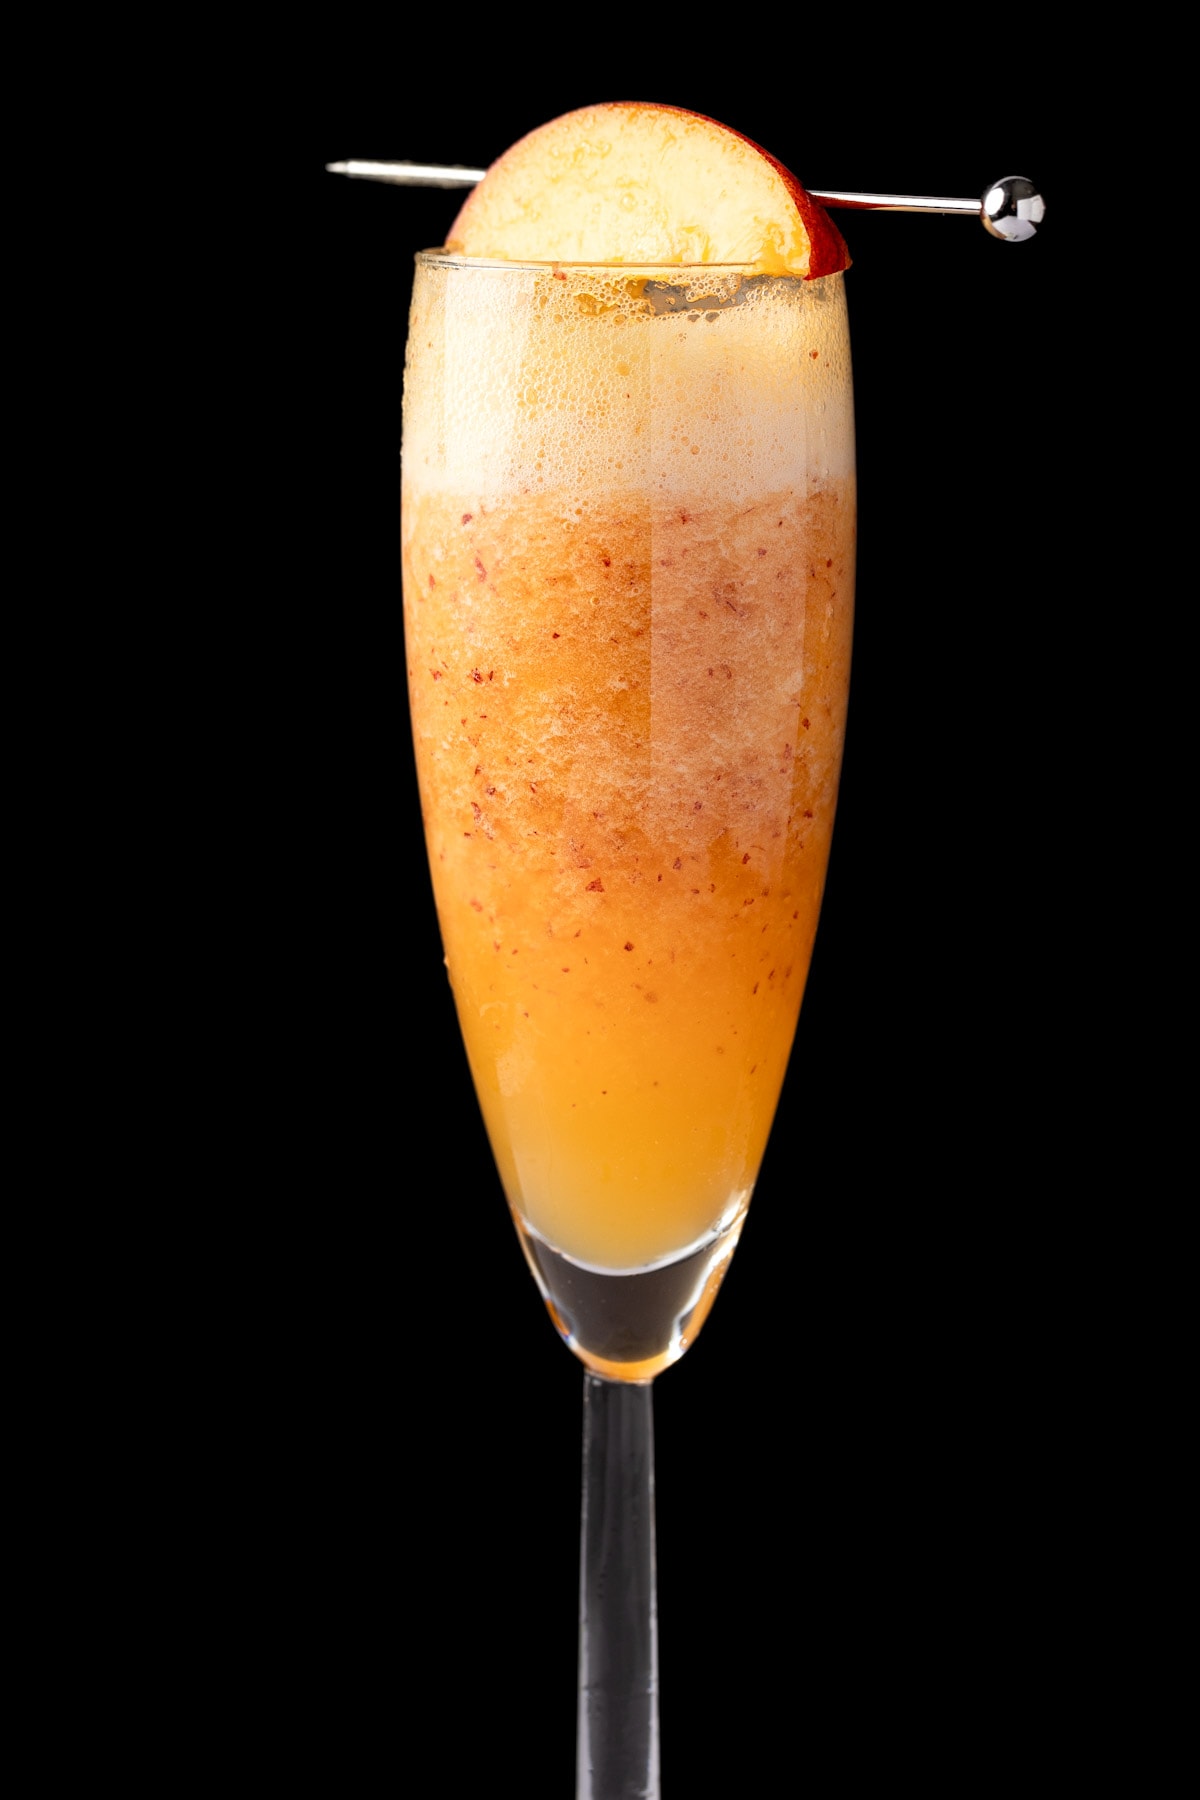 A non alcoholic peach bellini garnished with a slice of fresh peach, on a black background.